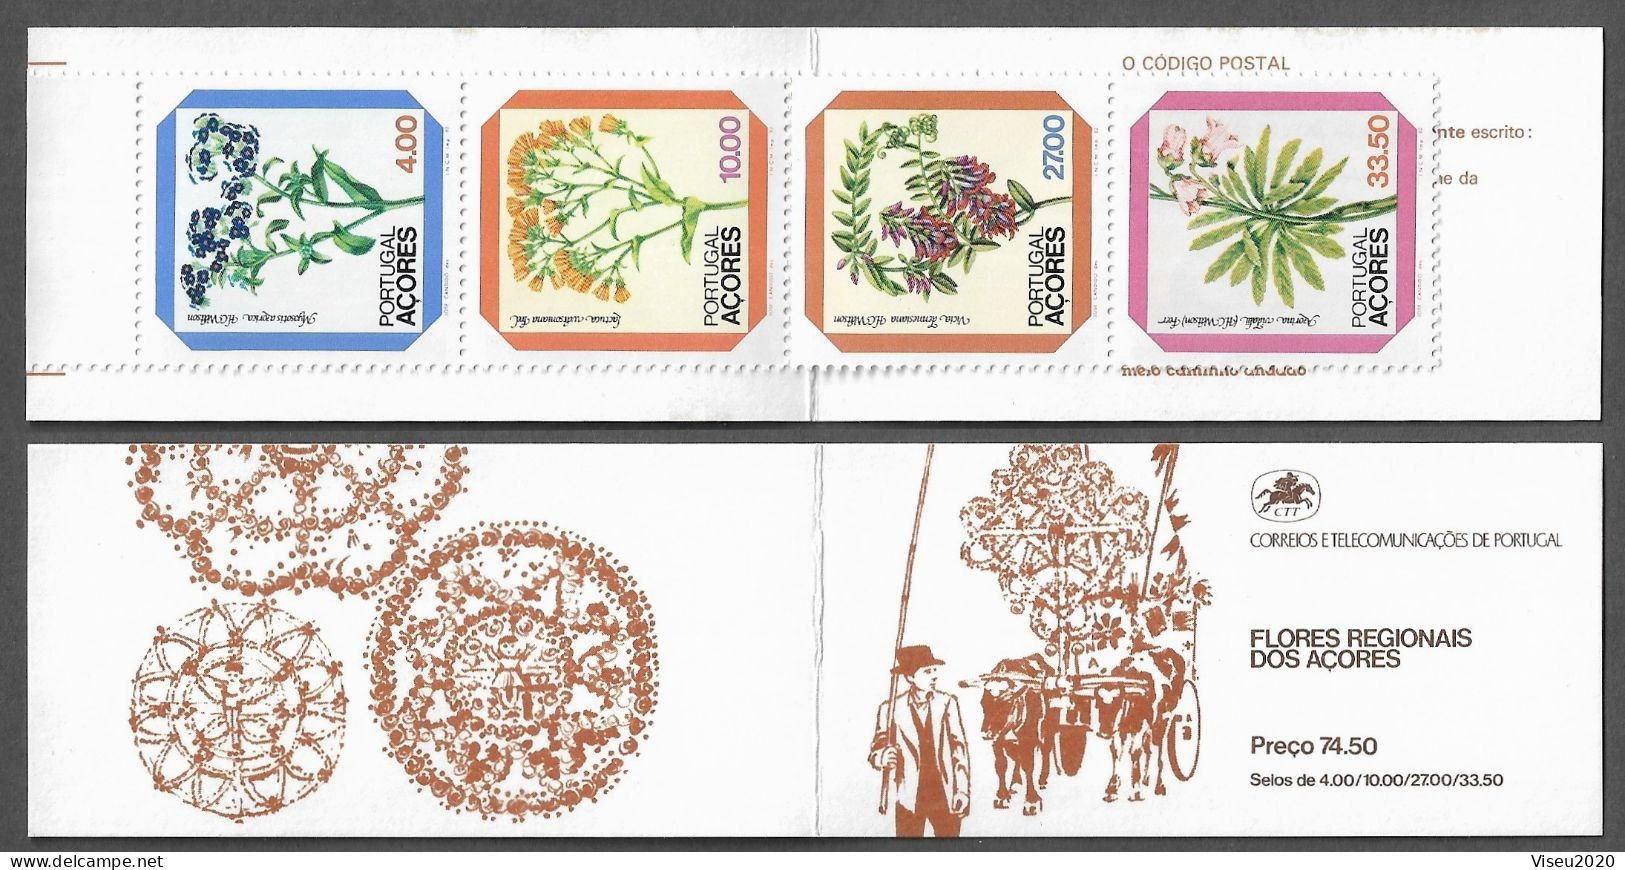 Portugal Booklet  Afinsa 25 - AZORES 1982 Definitive Issues - Flowers MNH - Booklets